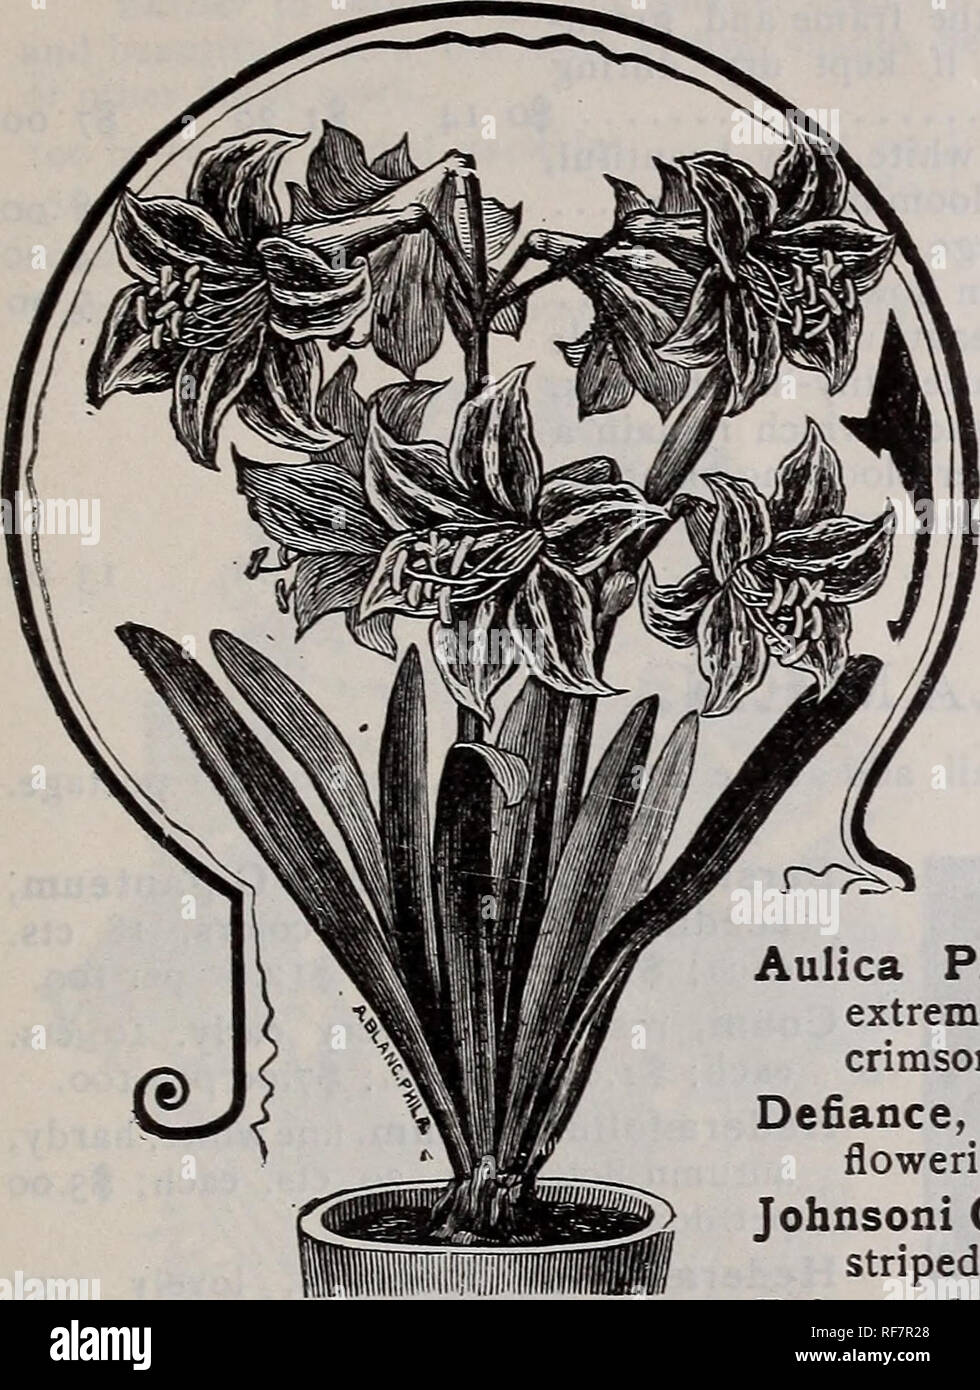 . Wholesale catalogue of choice Dutch bulbs roots and plants : fall 1901. Nursery stock New Jersey Englewood Catalogs; Bulbs (Plants) Catalogs; Flowers Catalogs; Plants, Ornamental Catalogs. Please Note Low Prices per 100 and 000. 19 AMARYLLIS. (Hippeastrum.) Single Bulbs free by mail. If desired by mail, add at the rate of 40c. per doz. for postage. It is impossible to name a more mag- nificent genus of bulbous plants than this. They are of the easiest possible culture and require but little care. They throw up beautiful trumpet-shaped flowers of the richest colors, from crimson to nearly pu Stock Photo